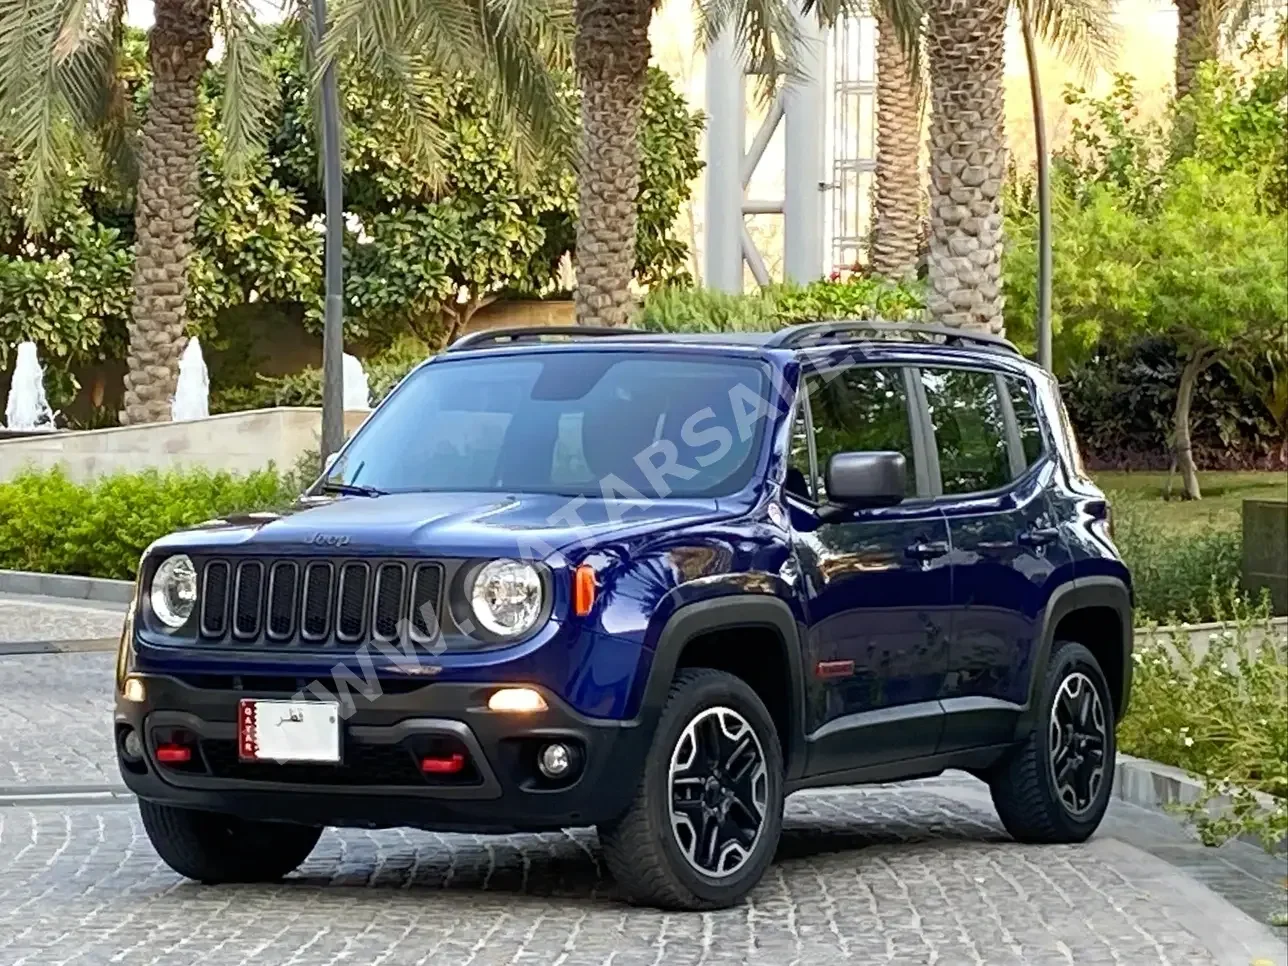 Jeep  Renegade  2017  Automatic  53,000 Km  4 Cylinder  All Wheel Drive (AWD)  SUV  Blue